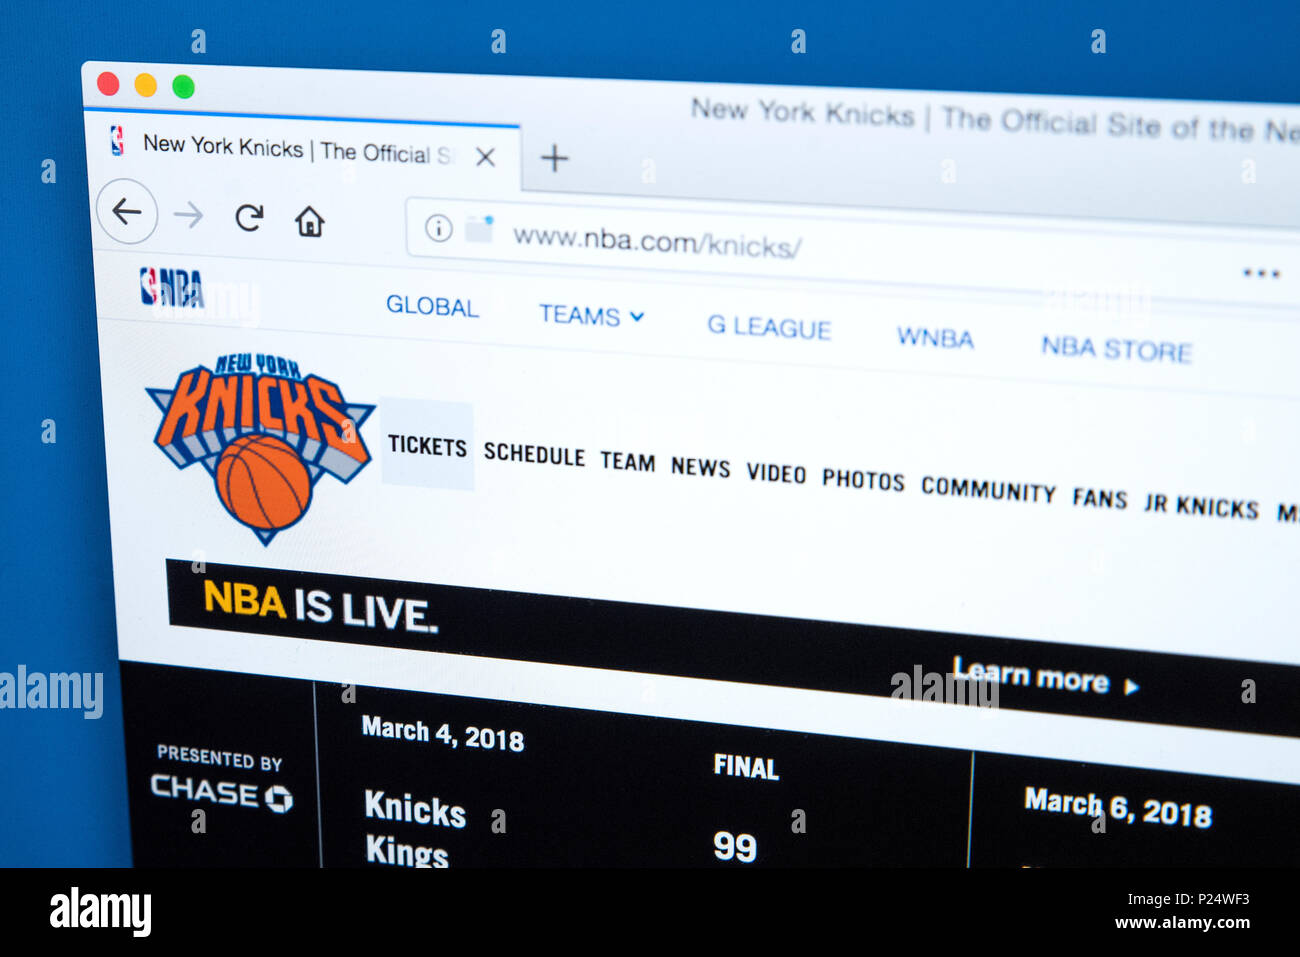 https://c8.alamy.com/comp/P24WF3/london-uk-march-5th-2018-the-homepage-of-the-official-website-for-the-new-york-knicks-the-american-professional-basketball-team-on-5th-march-20-P24WF3.jpg